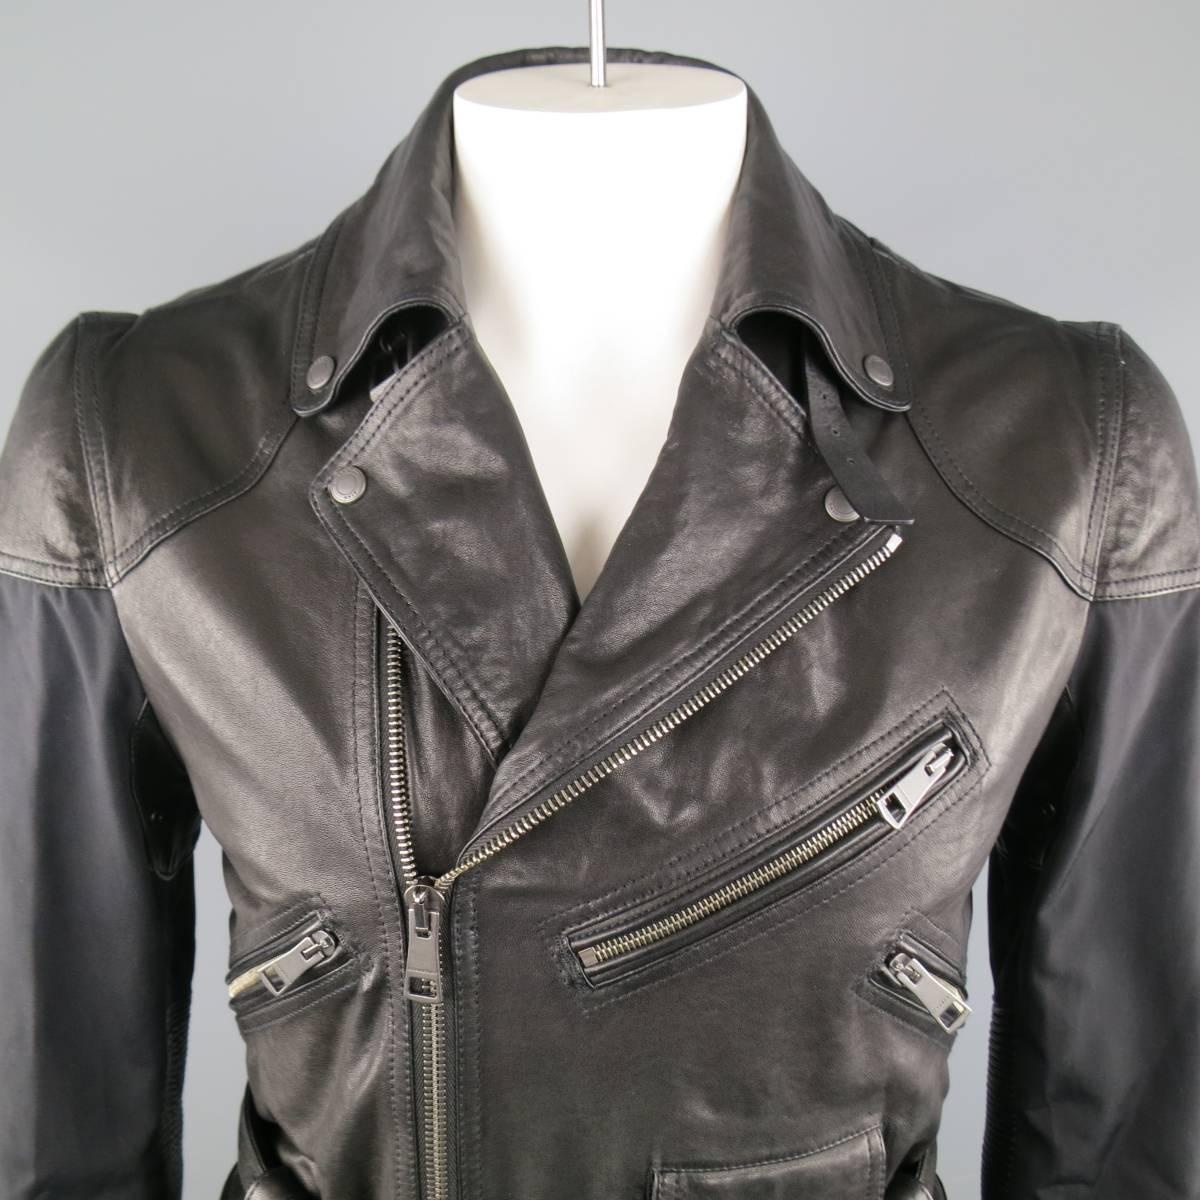 BURBERRY BRIT Jacket consists of nylon and leather material in a black color tone. Designed in a moto/field style jacket, asymmetrical zip-up front, notch collar with buckle closure underneath. Detailed with multi-zipper front, waist belt, bottom